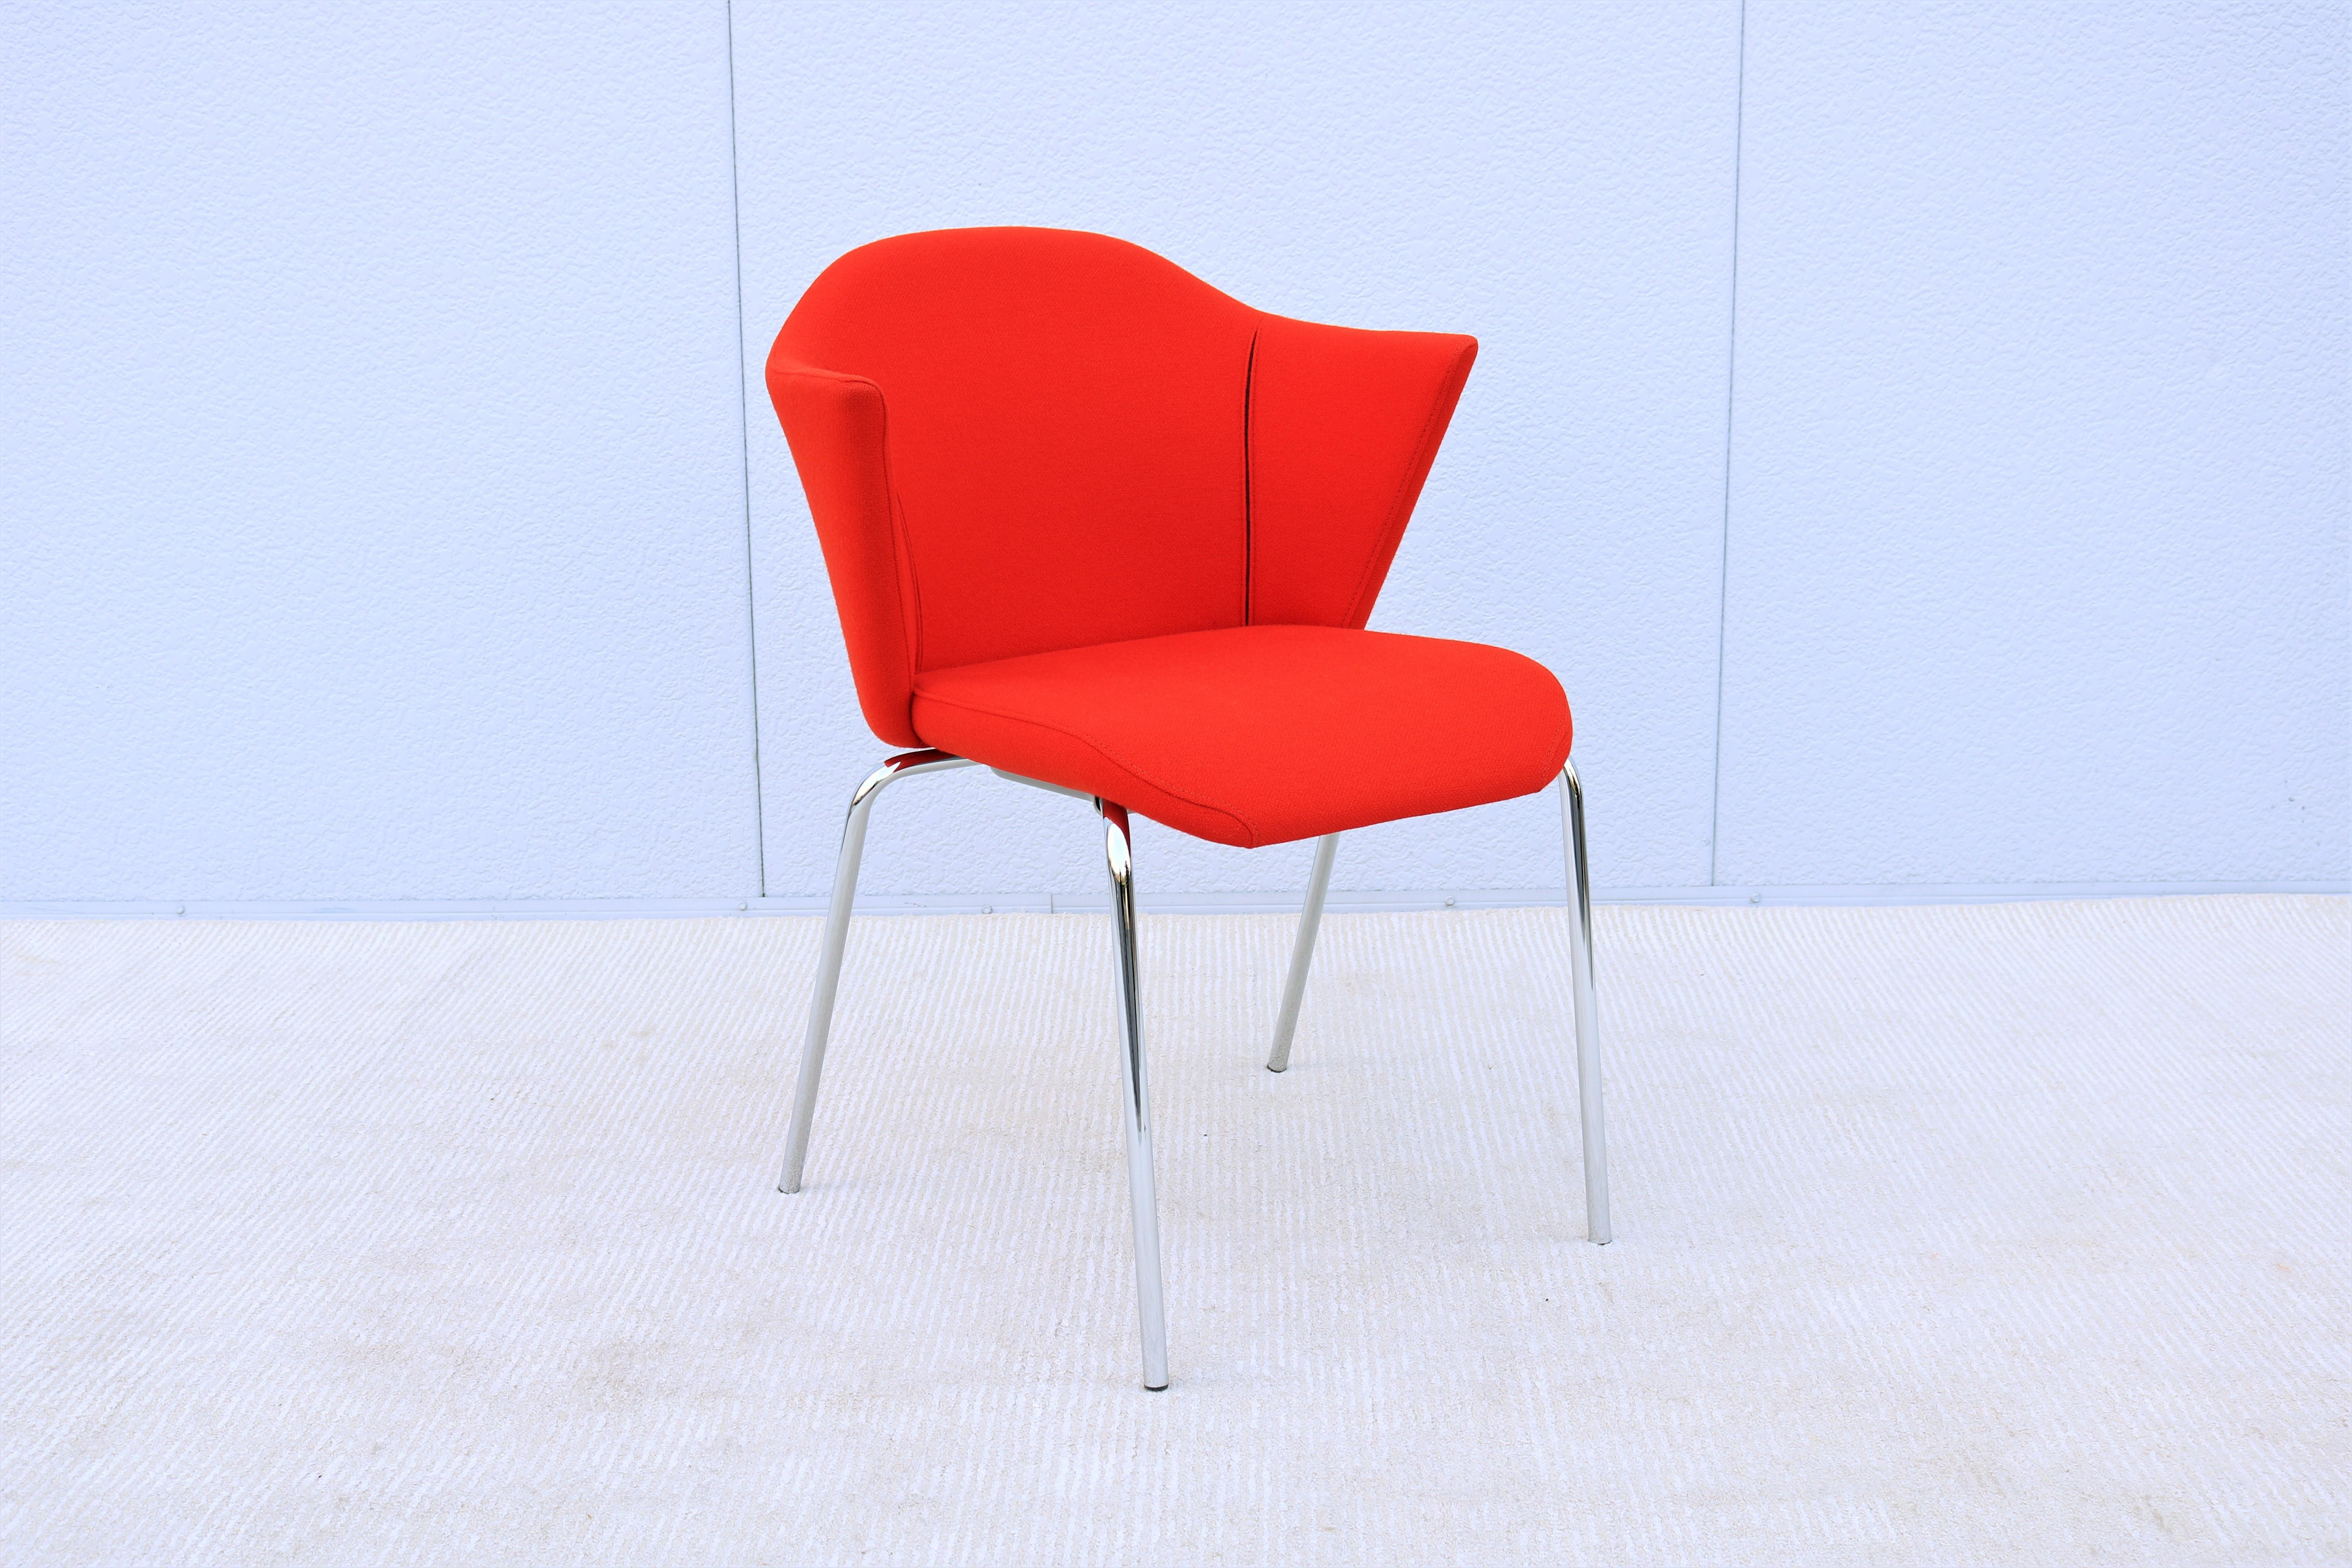 This practical and elegant Capa guest chair combines a snug winged back with a generous contoured seat for comfort and support.
Capa has a unique shape, a fully upholstered body, and a double-needle topstitching design.
Feature a flex back design